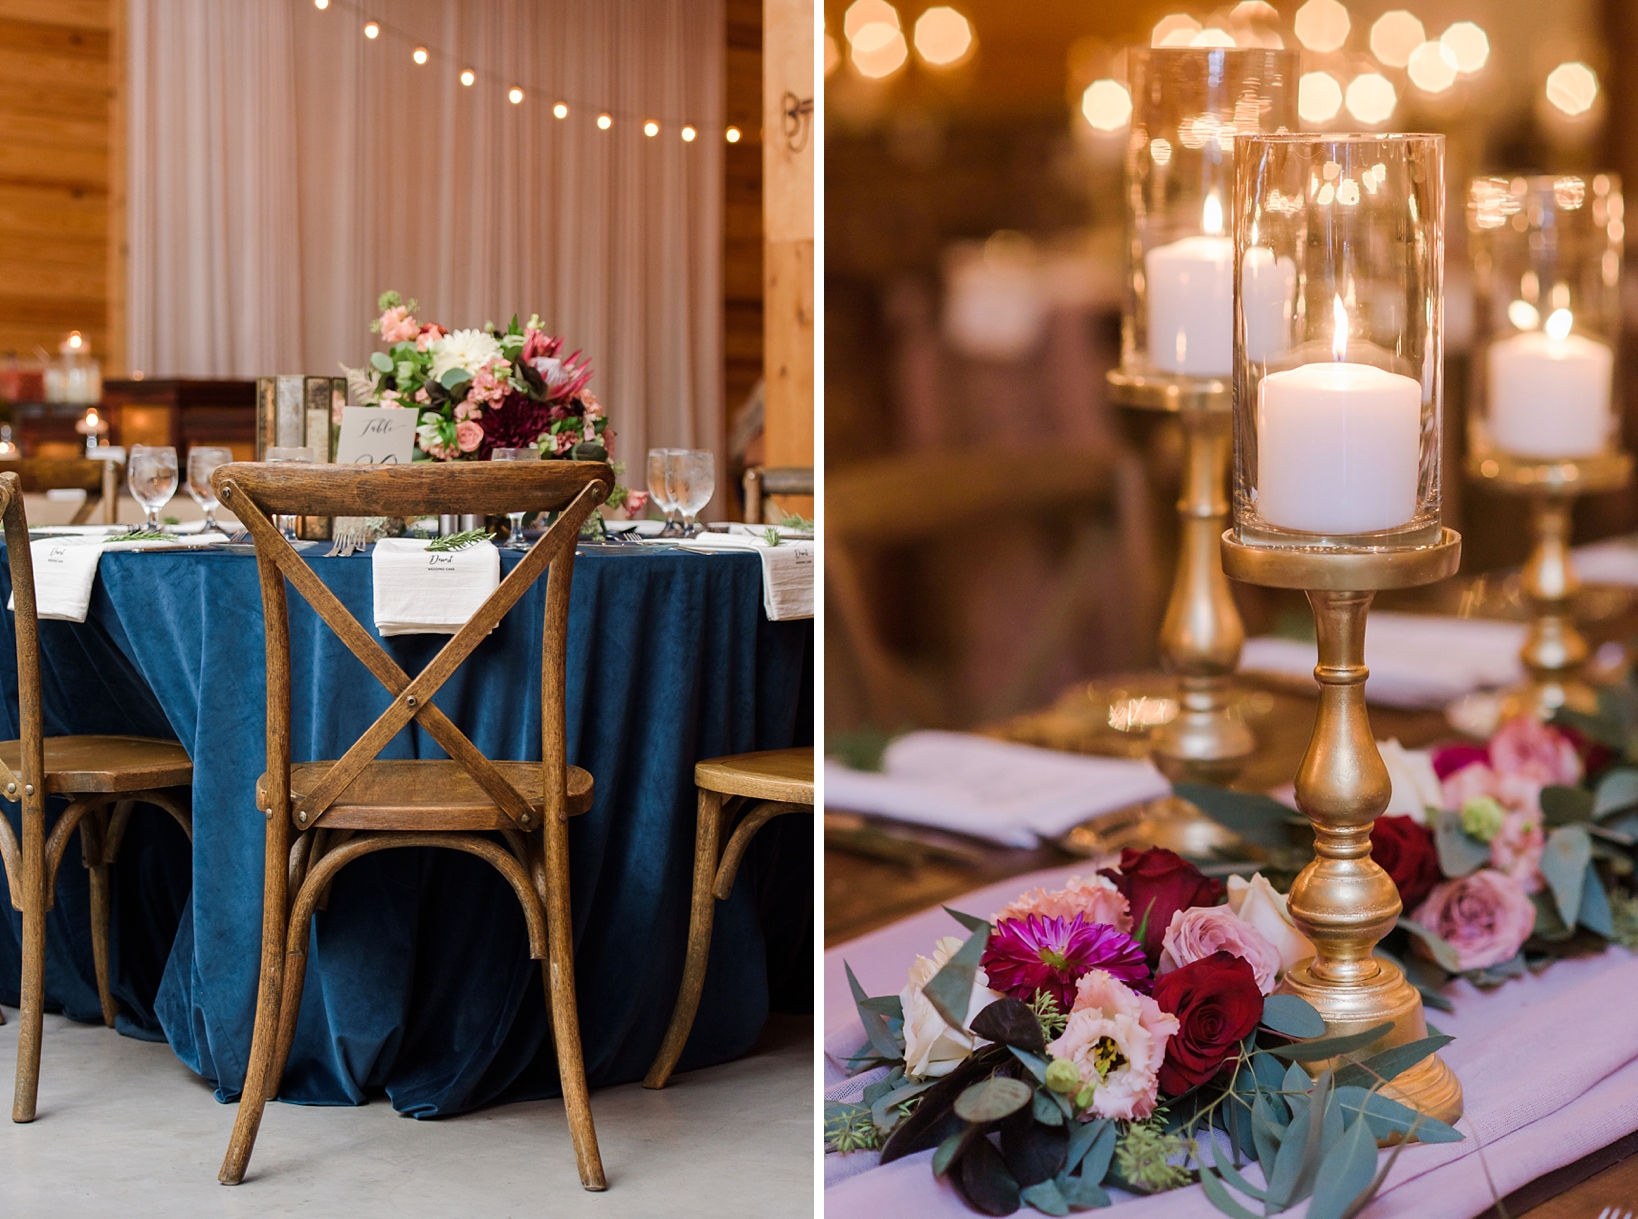 Rustic wedding chair and floral table runners